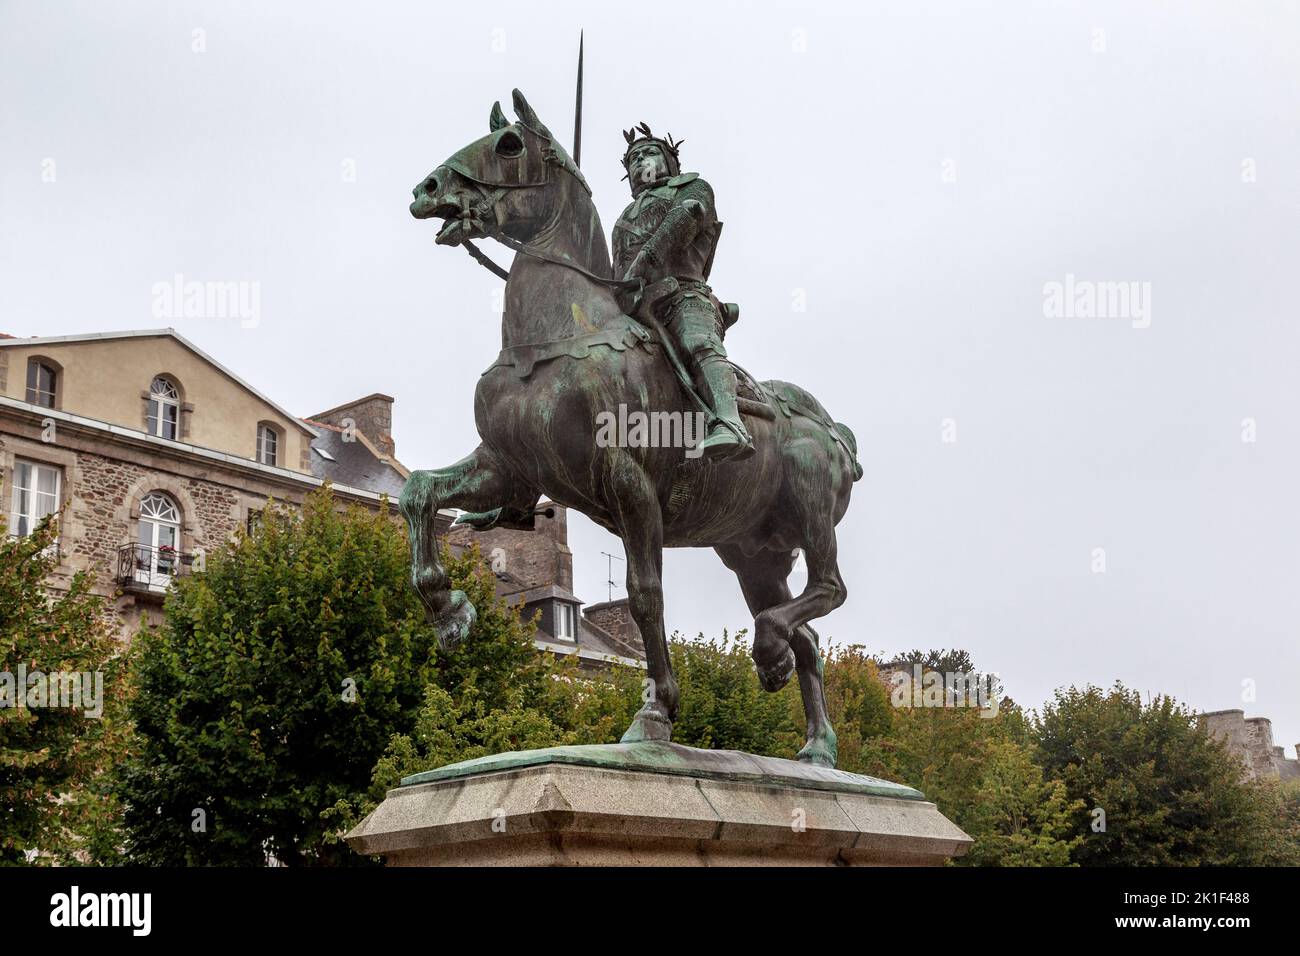 DINAN, FRANCE - SEPTEMBER 4, 2019: This is monument to the knight Bertrand du Guesclin, nation hero of Brittony. Stock Photo